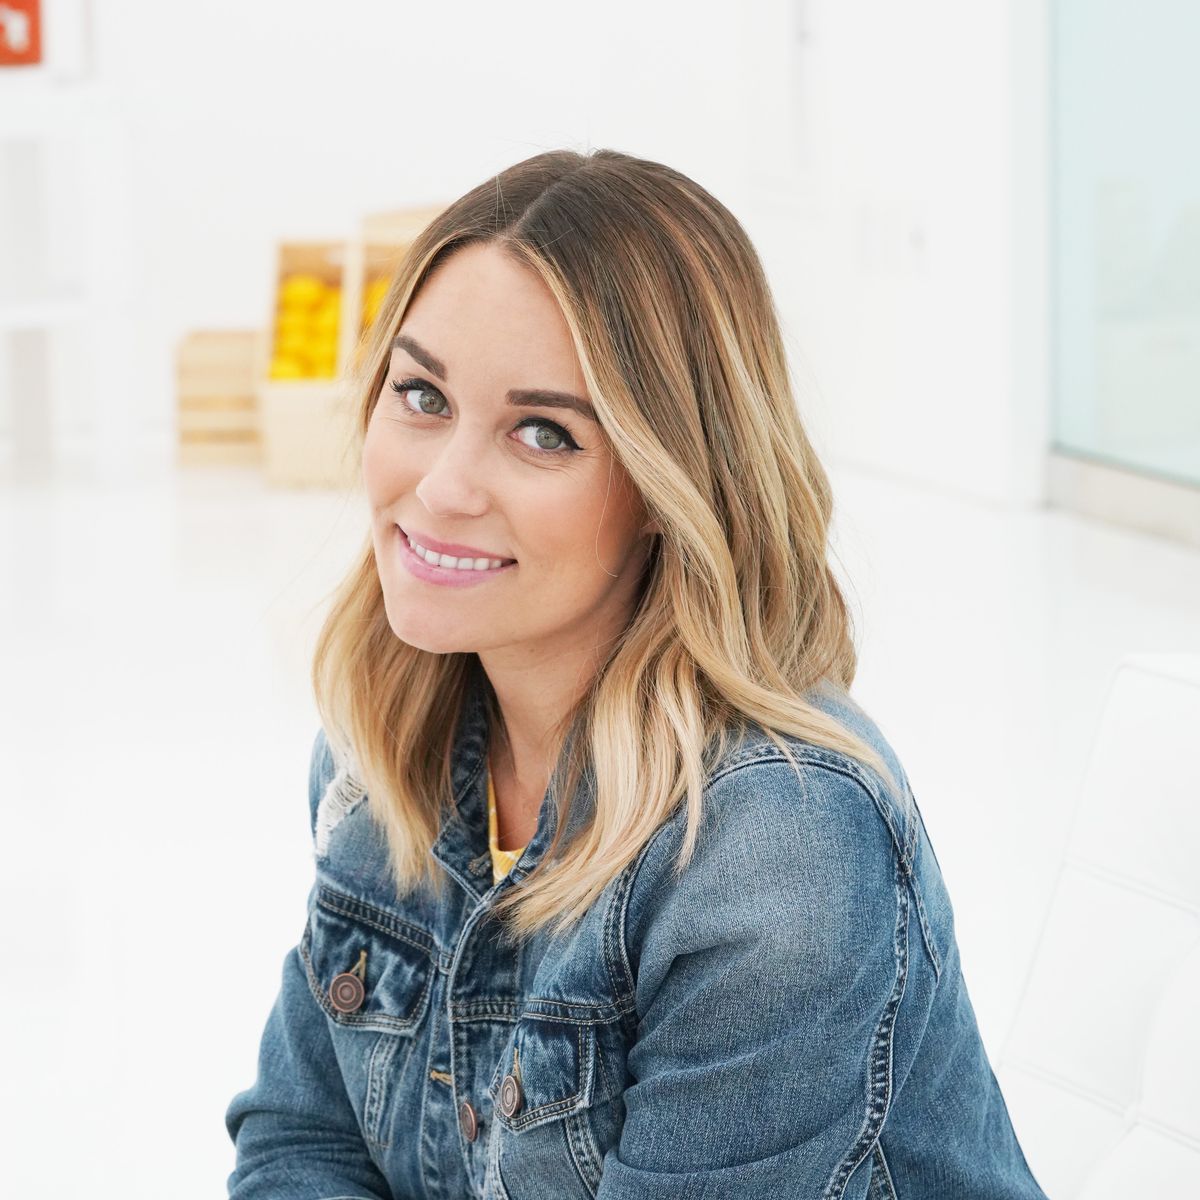 Lauren Conrad on Her New Kohl's Collection and Why She Avoids